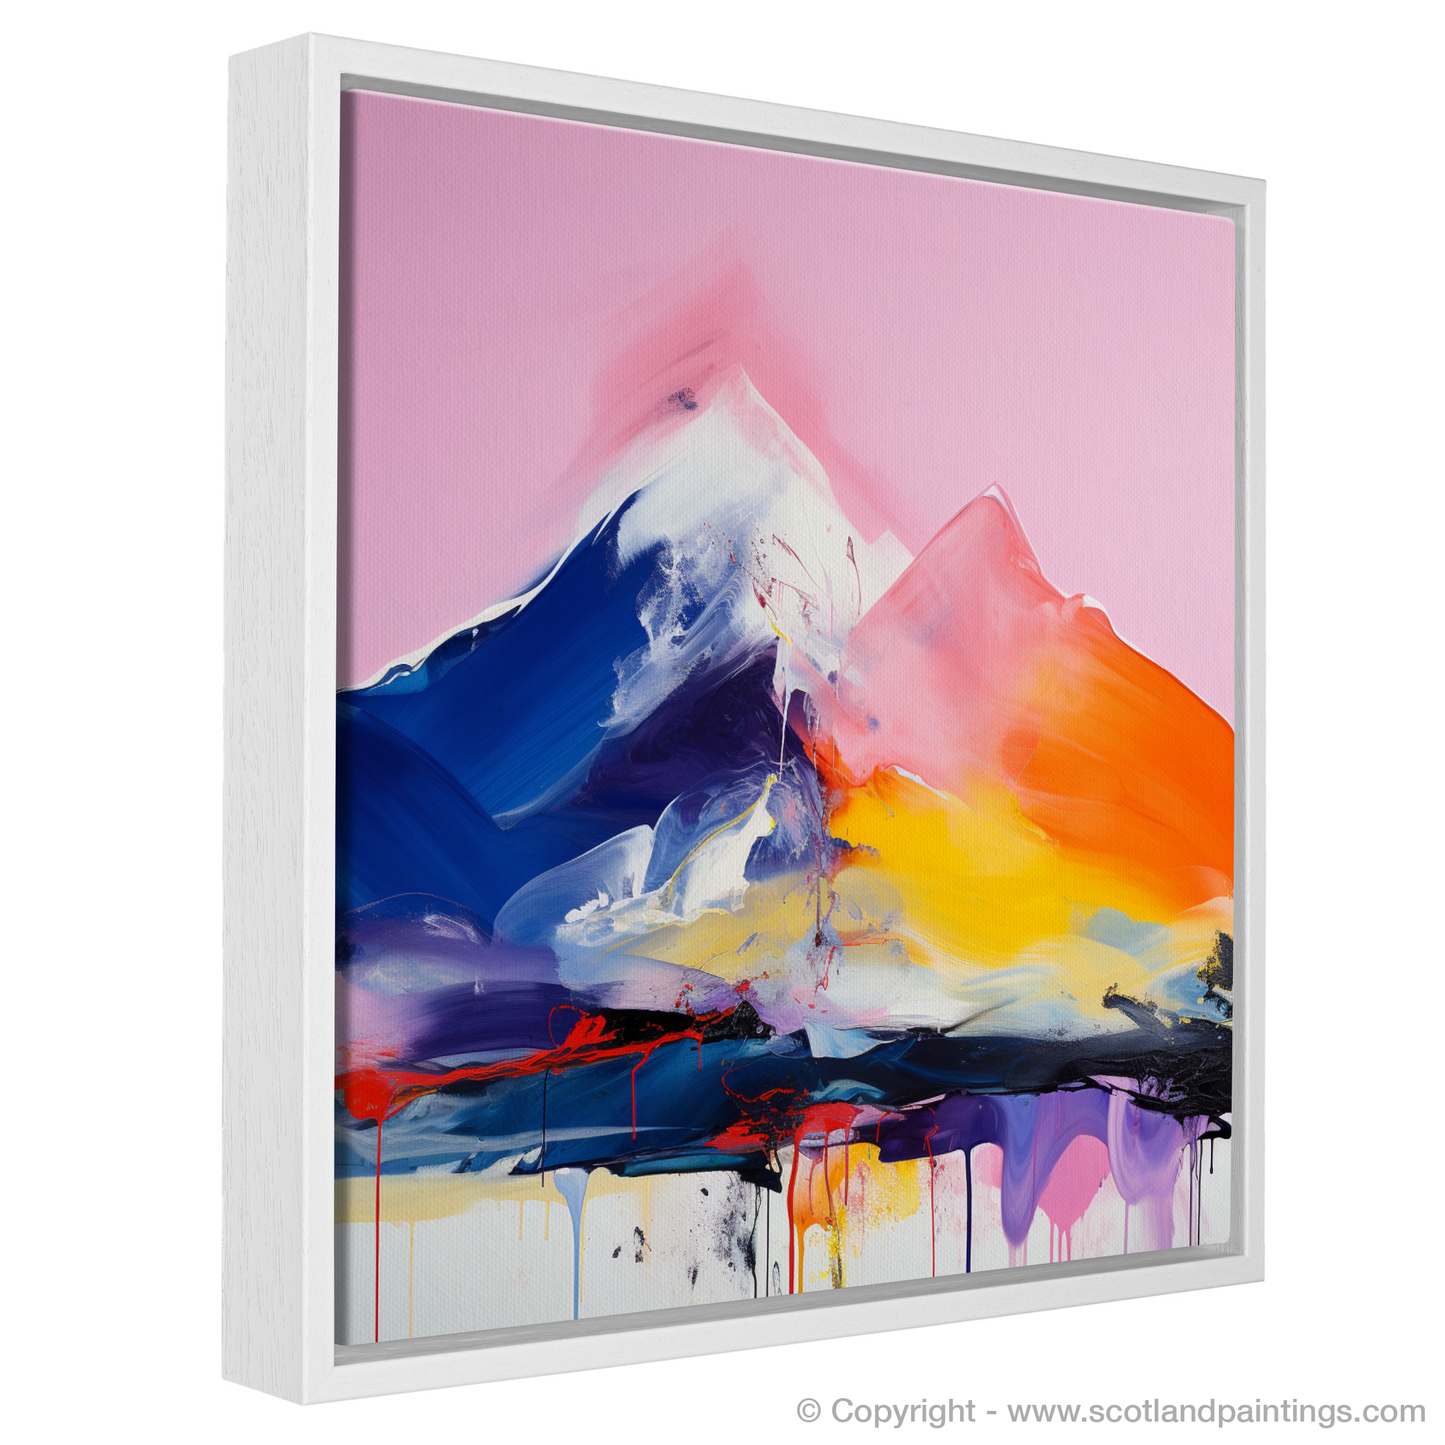 Painting and Art Print of Ben More entitled "Majestic Silhouette of Ben More: An Abstract Highland Tapestry".